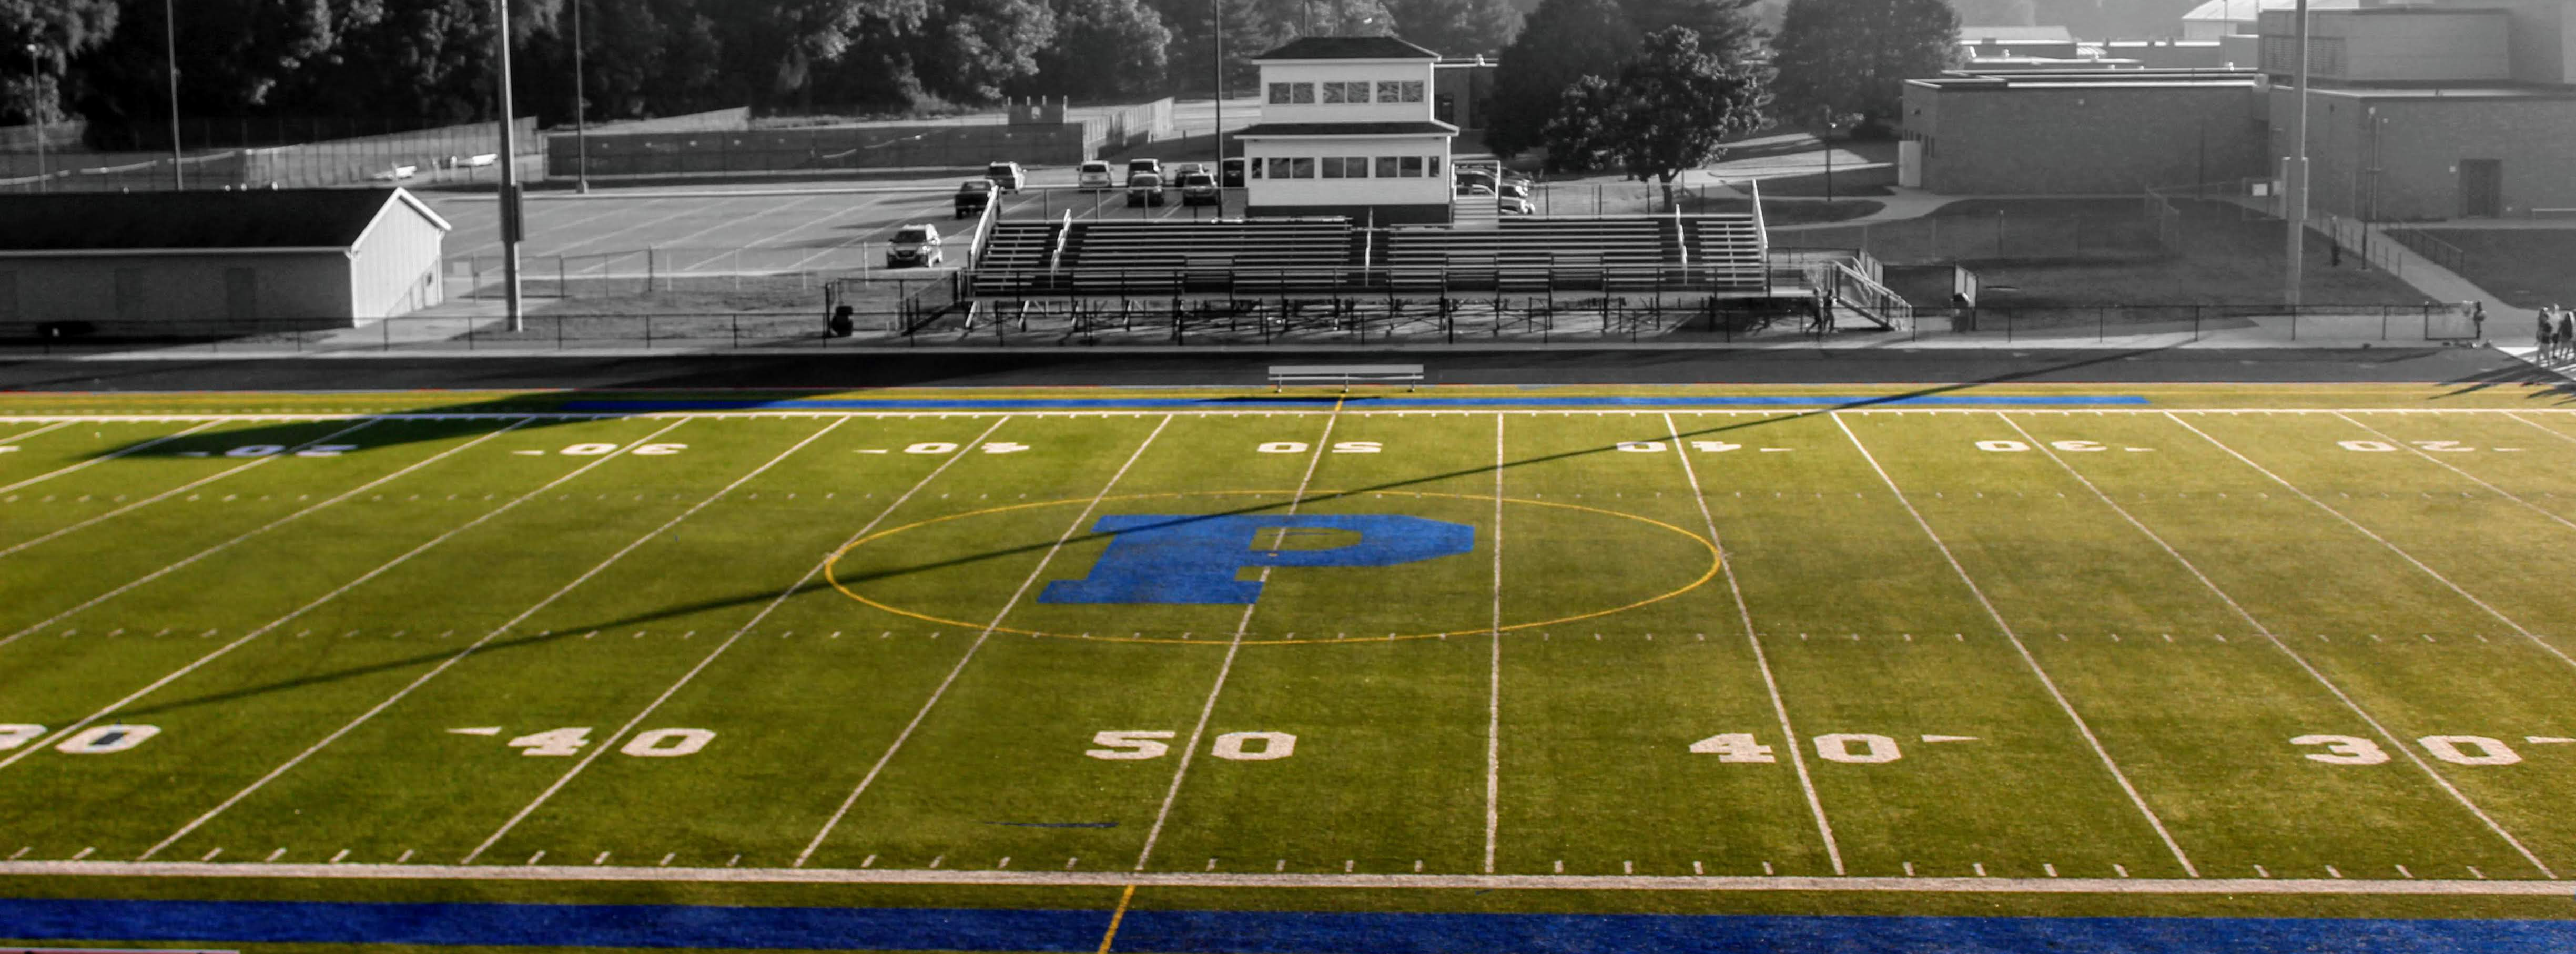 Picture of Streidl Field (PHS Football field)